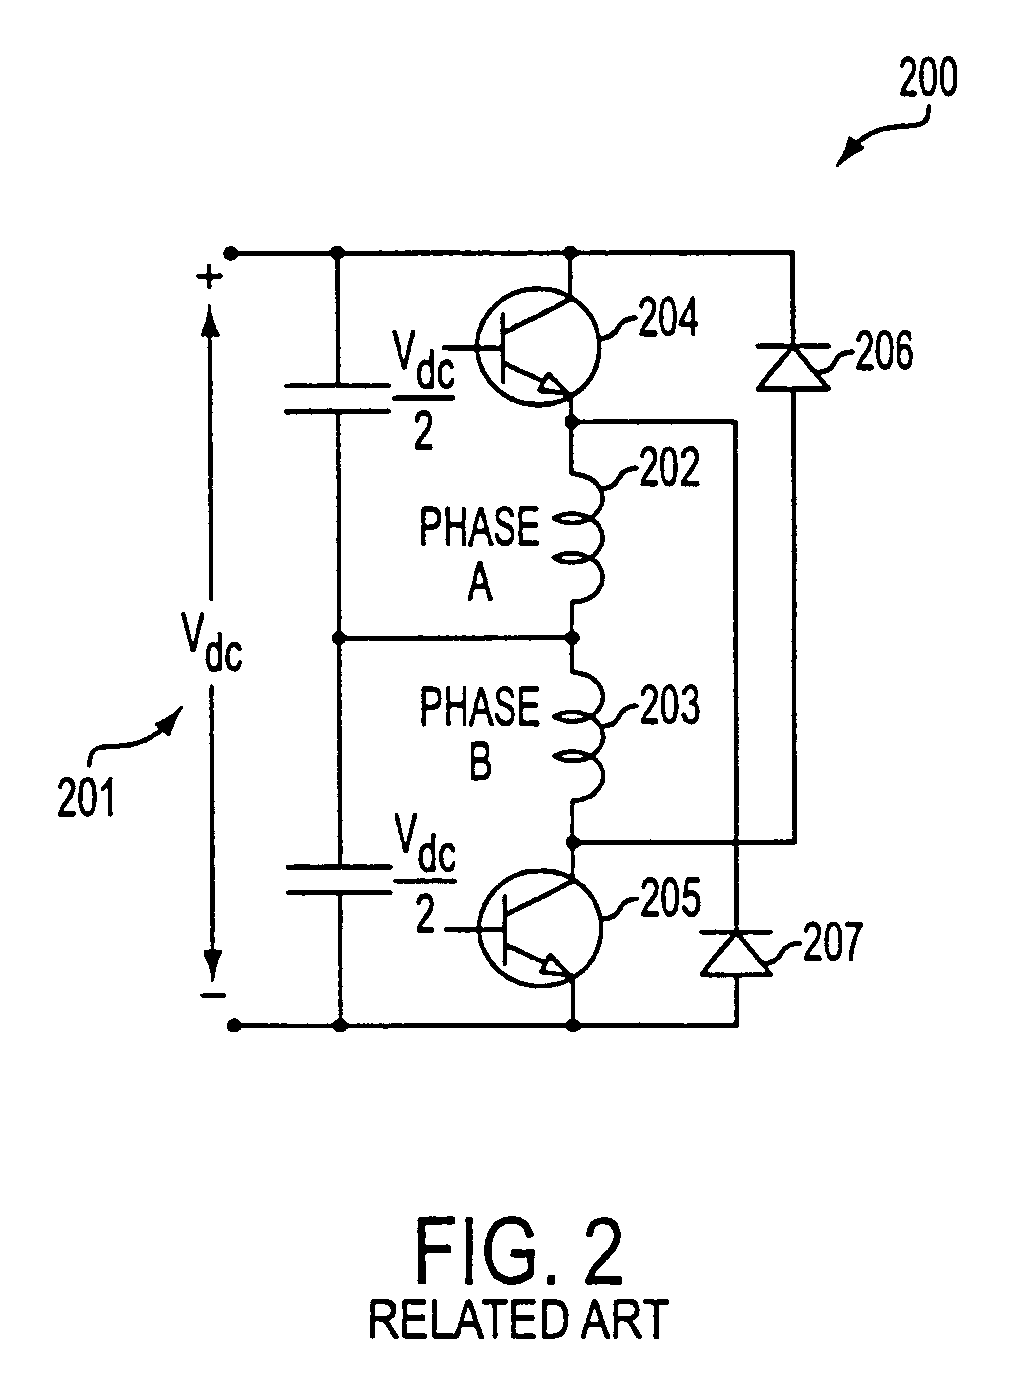 Method, apparatus, and system for drive control, power conversion, and start-up control in an SRM or PMBDCM drive system